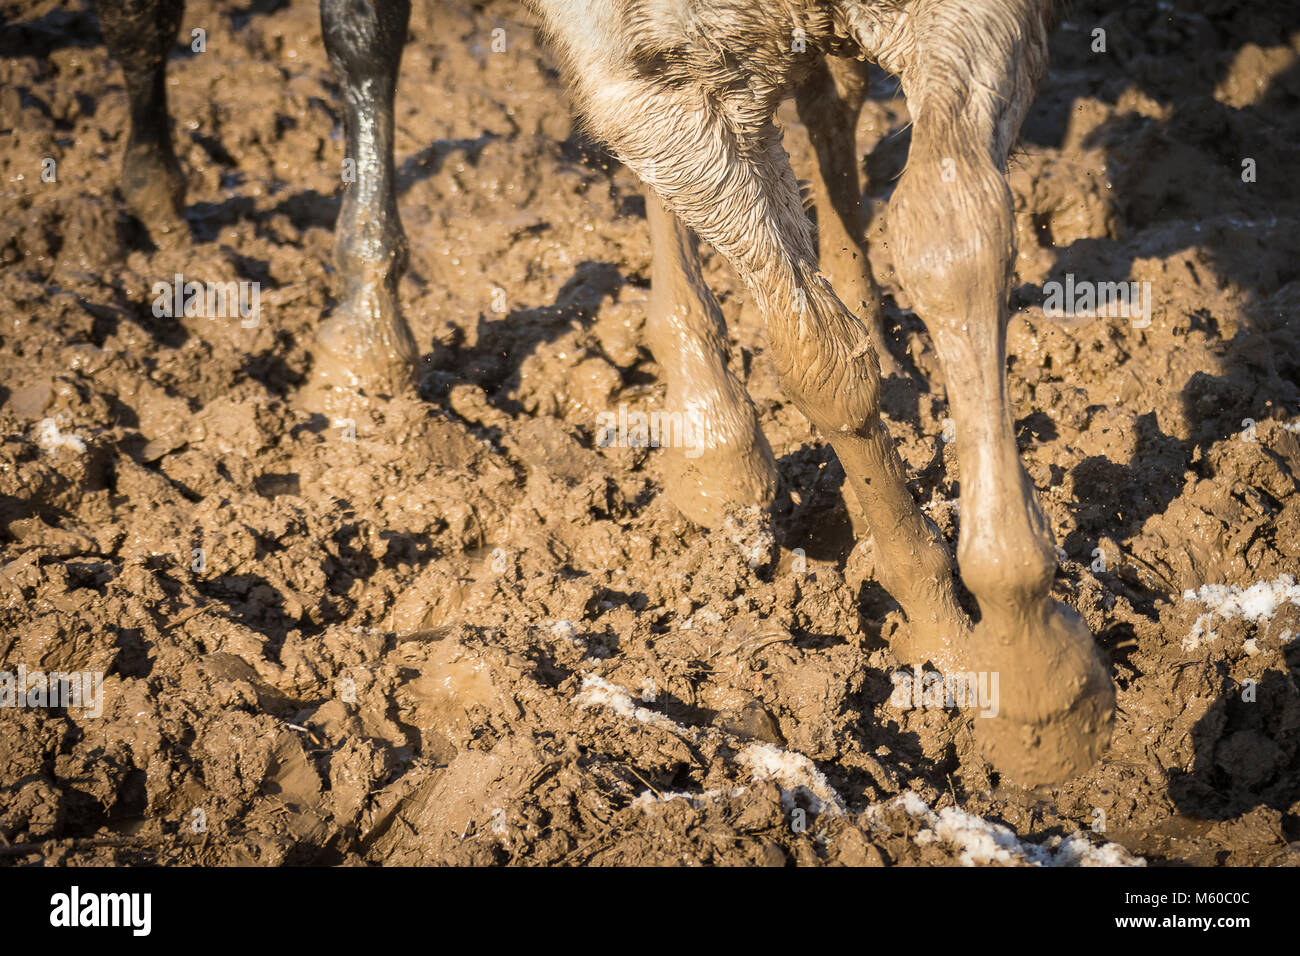 Domestic horse. Horses in a muddy paddock, close-up of legs. Germany Stock Photo